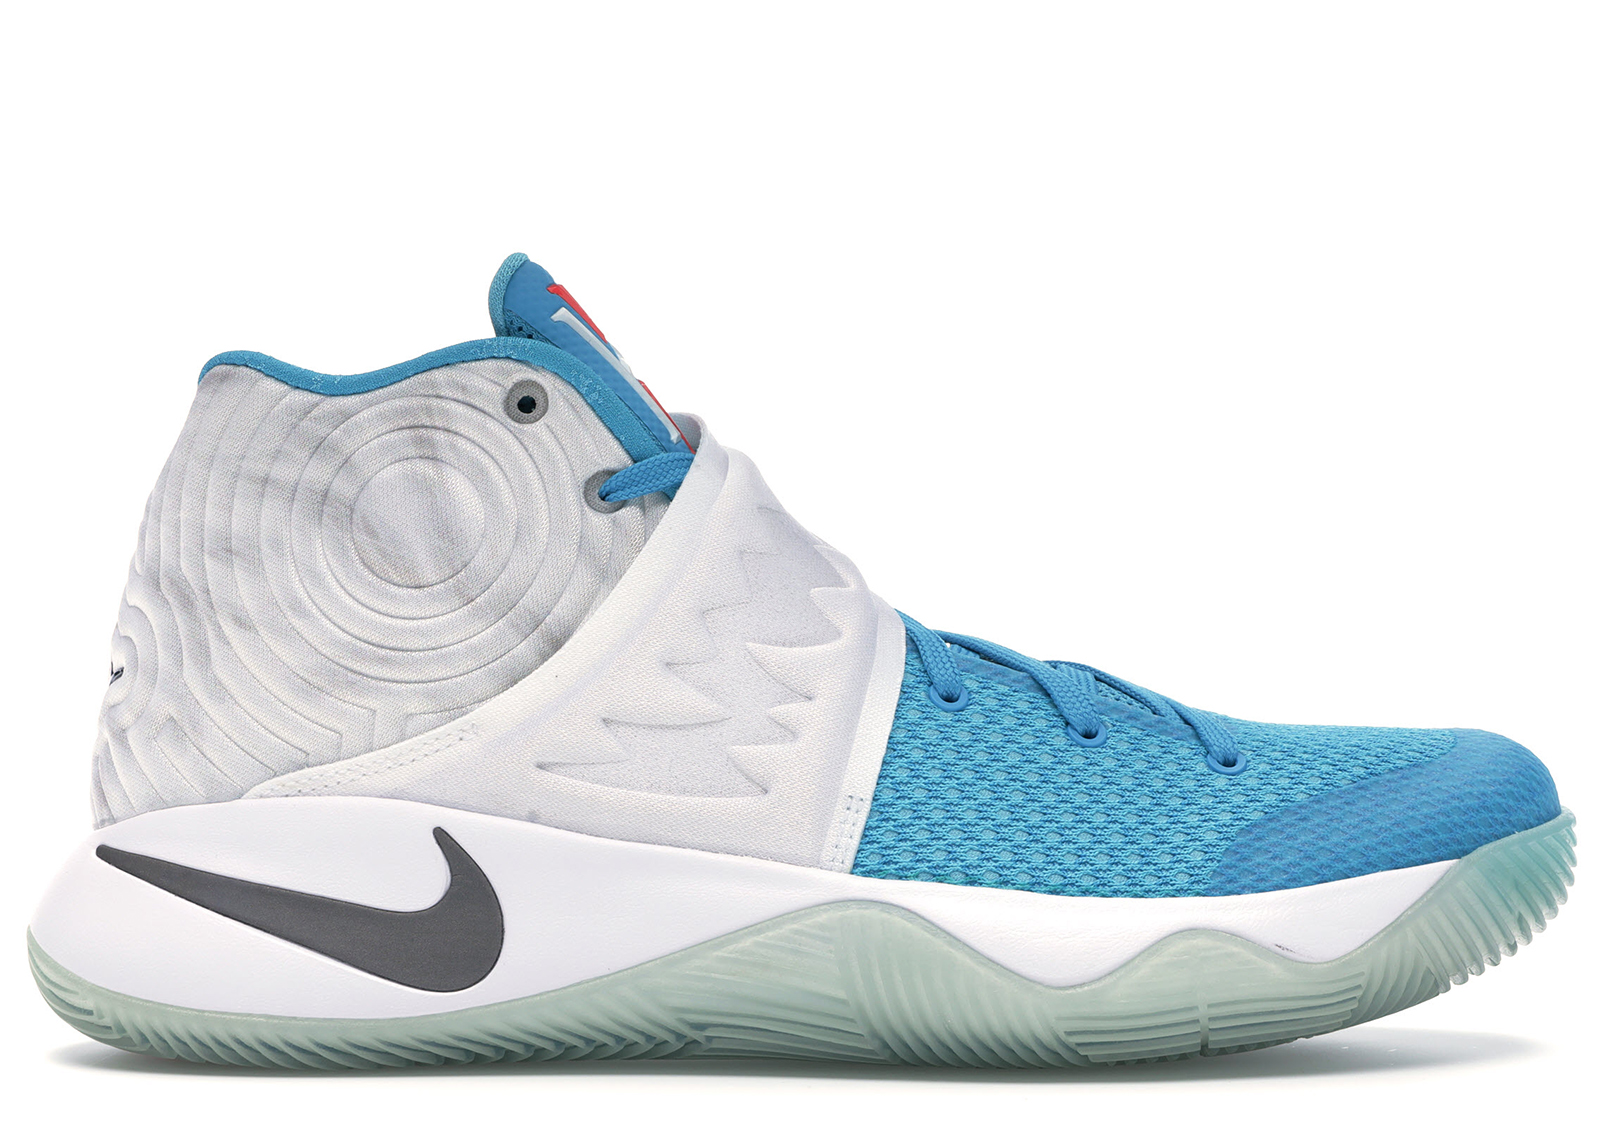 kyrie 2 size 8